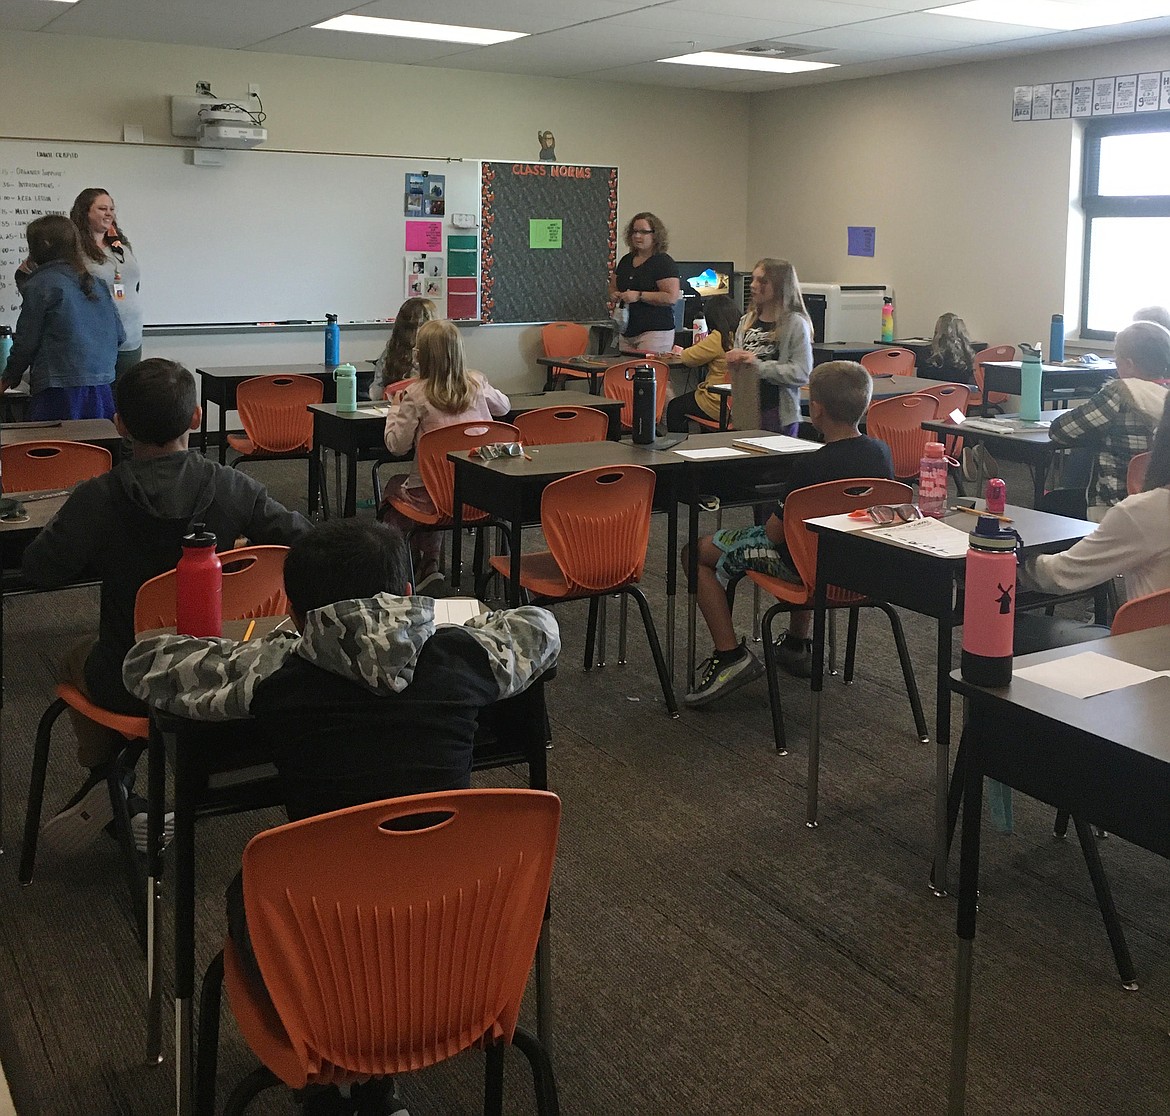 Students are now filling the halls and classrooms of the new Treaty Rock Elementary School in Post Falls. They're seen here in Avery Walker's class on the first day of school.